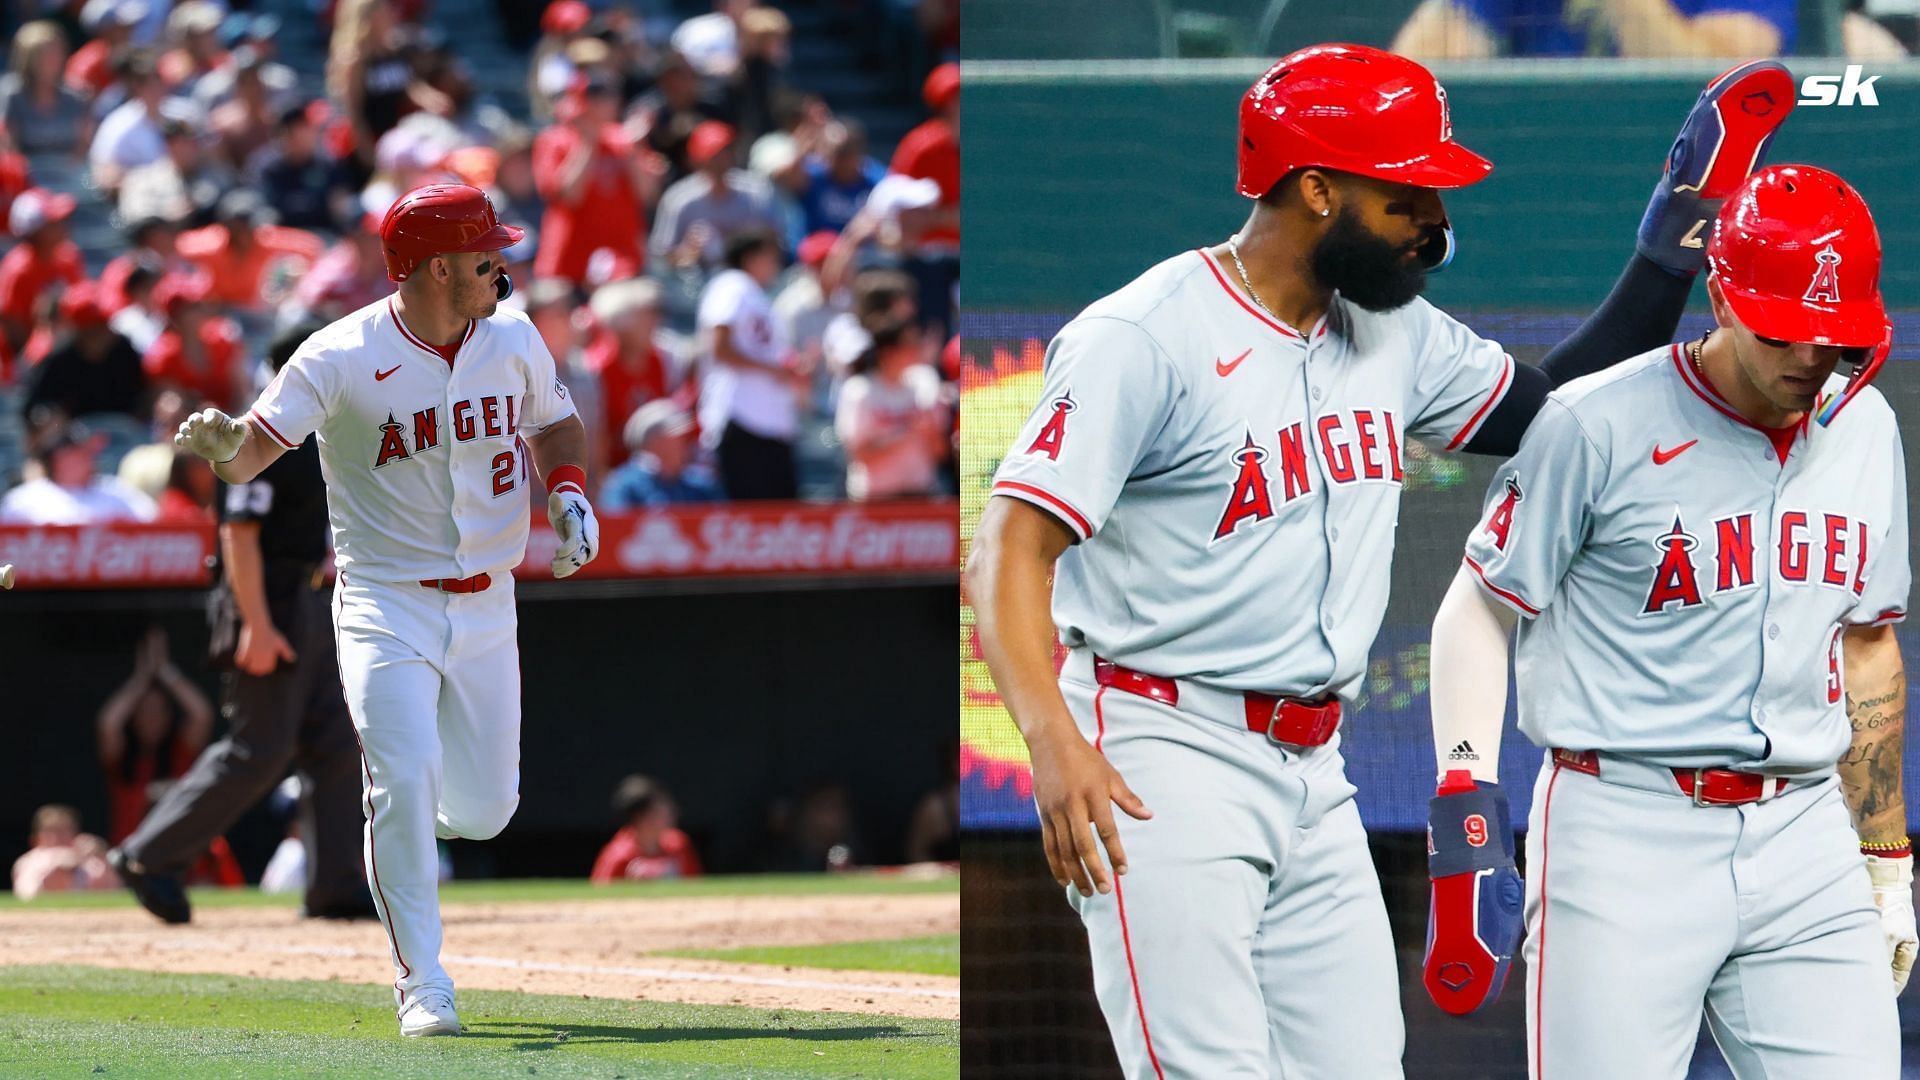 Los Angeles Angels Sluggers Mike Trout, Jo Adell, and Zach Neto